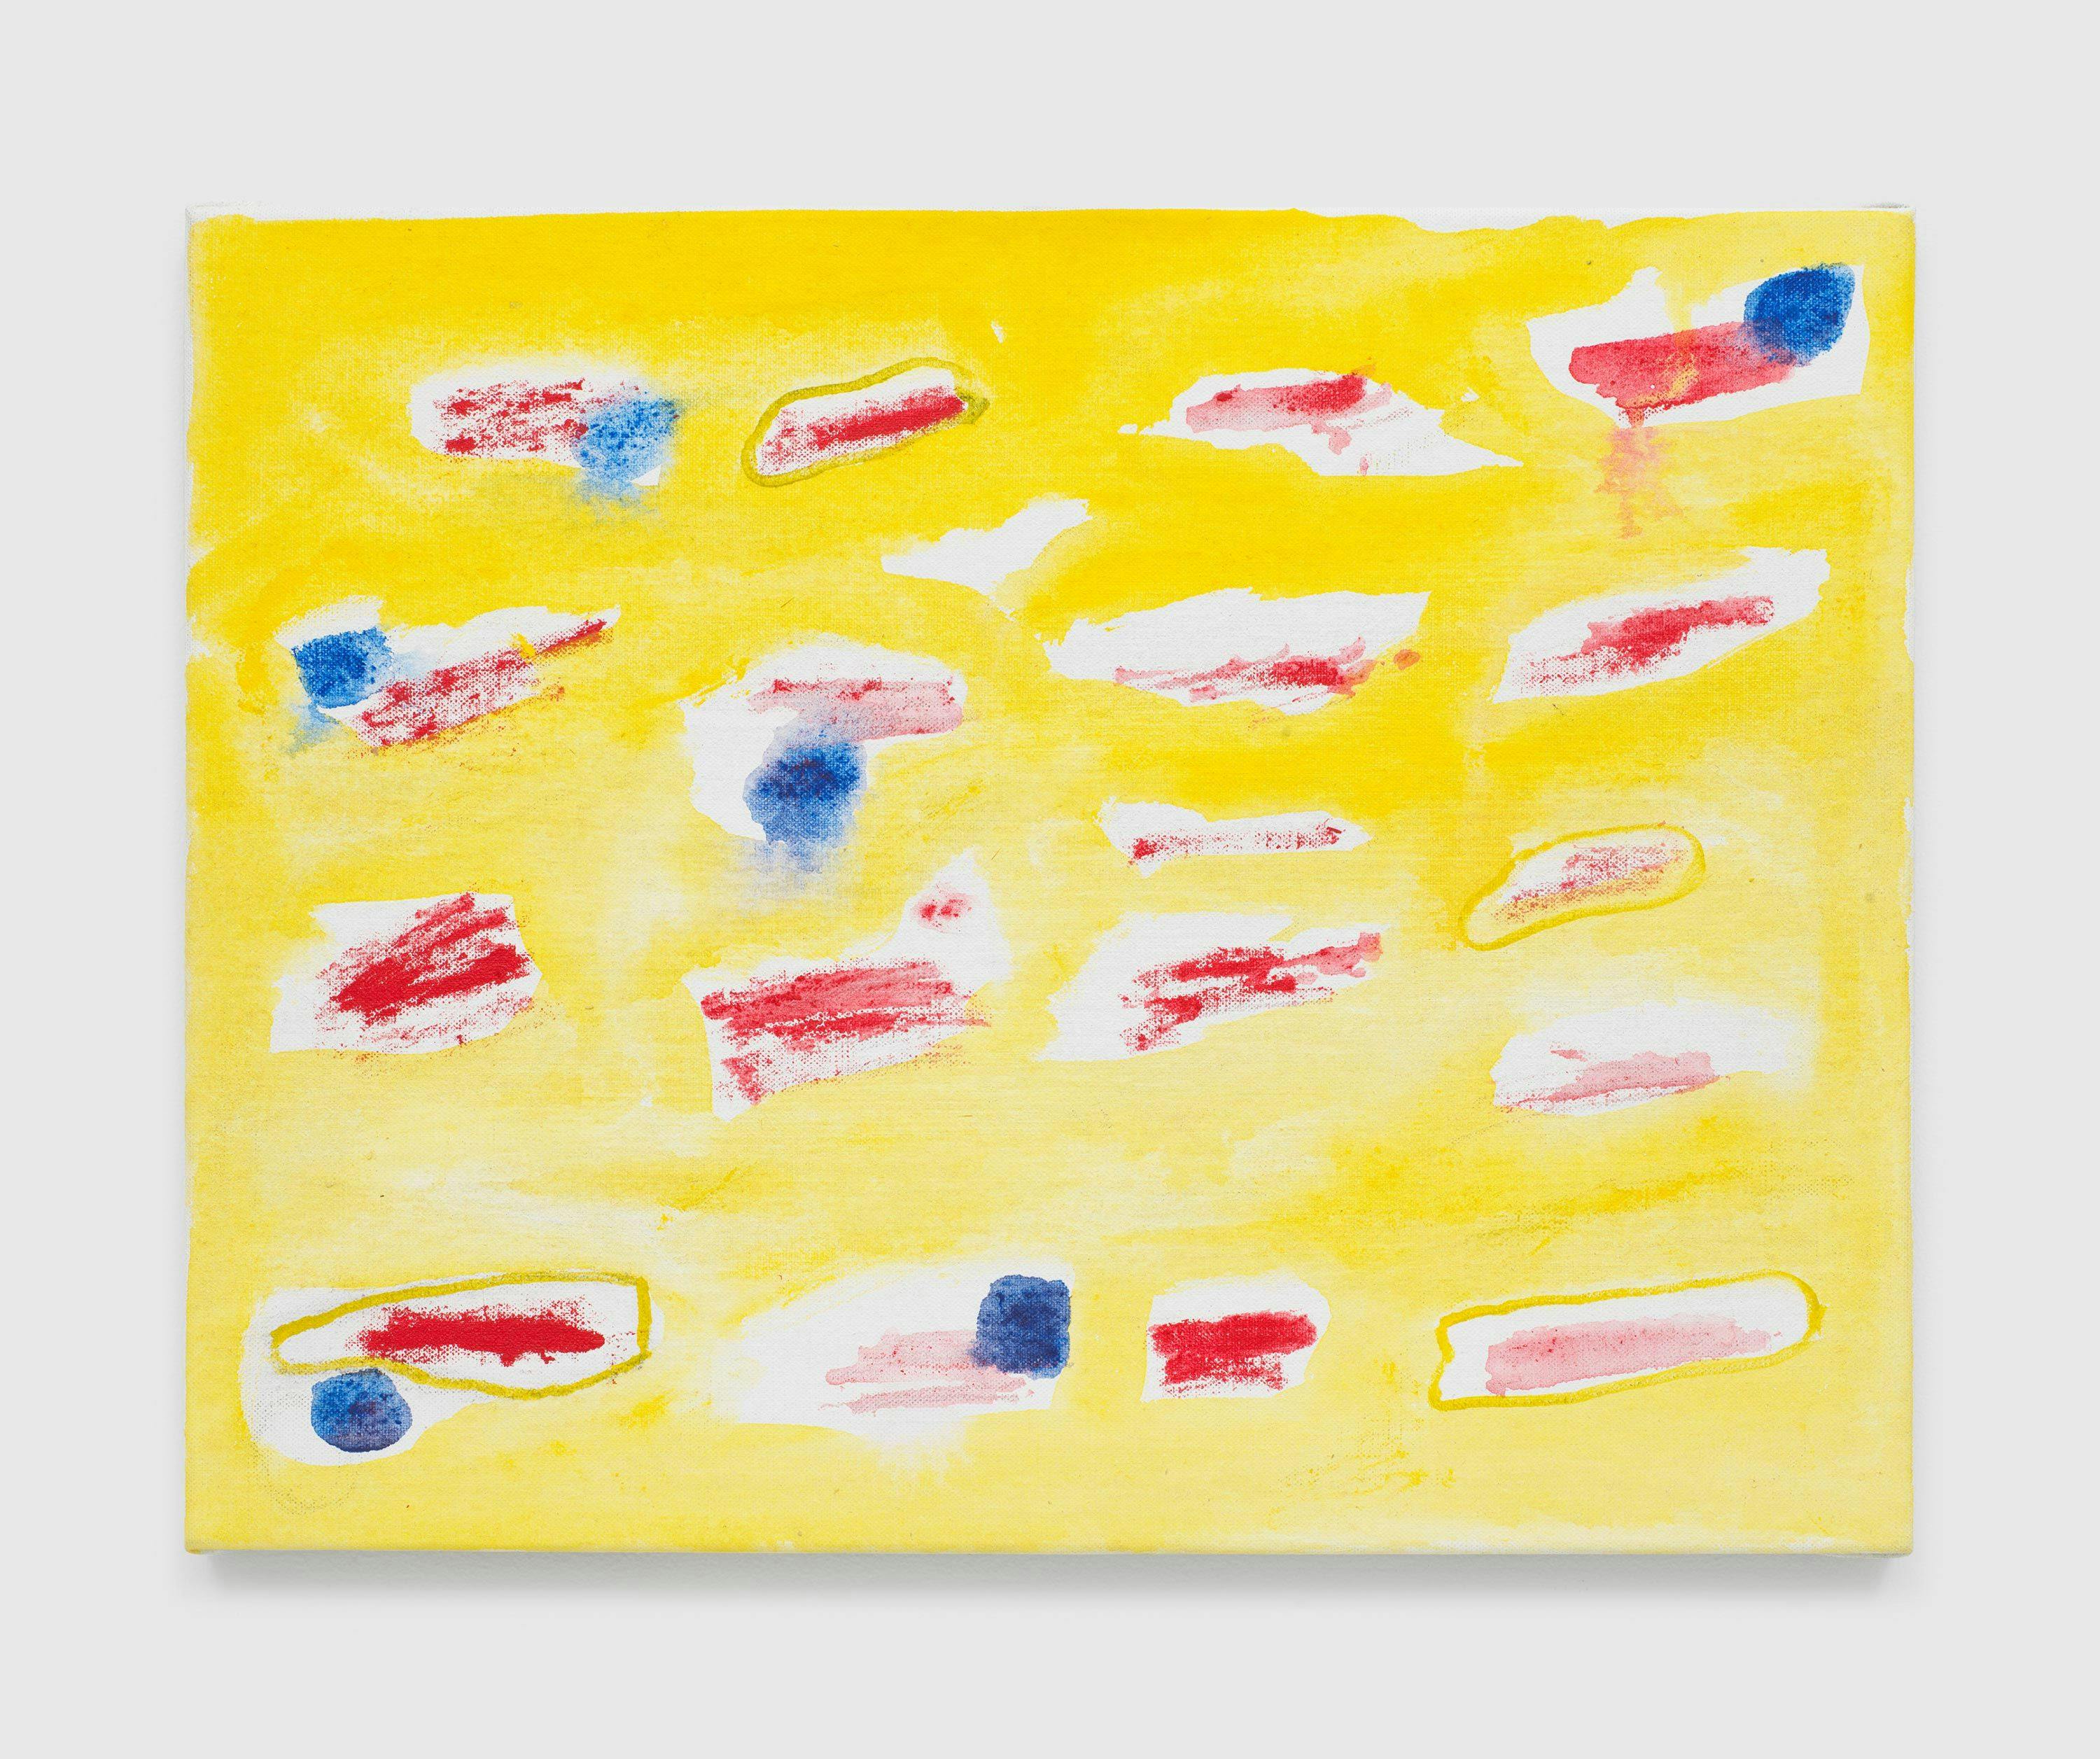 A painting by Raoul De Keyser, titled Airy (Vederlicht), dated 2010.